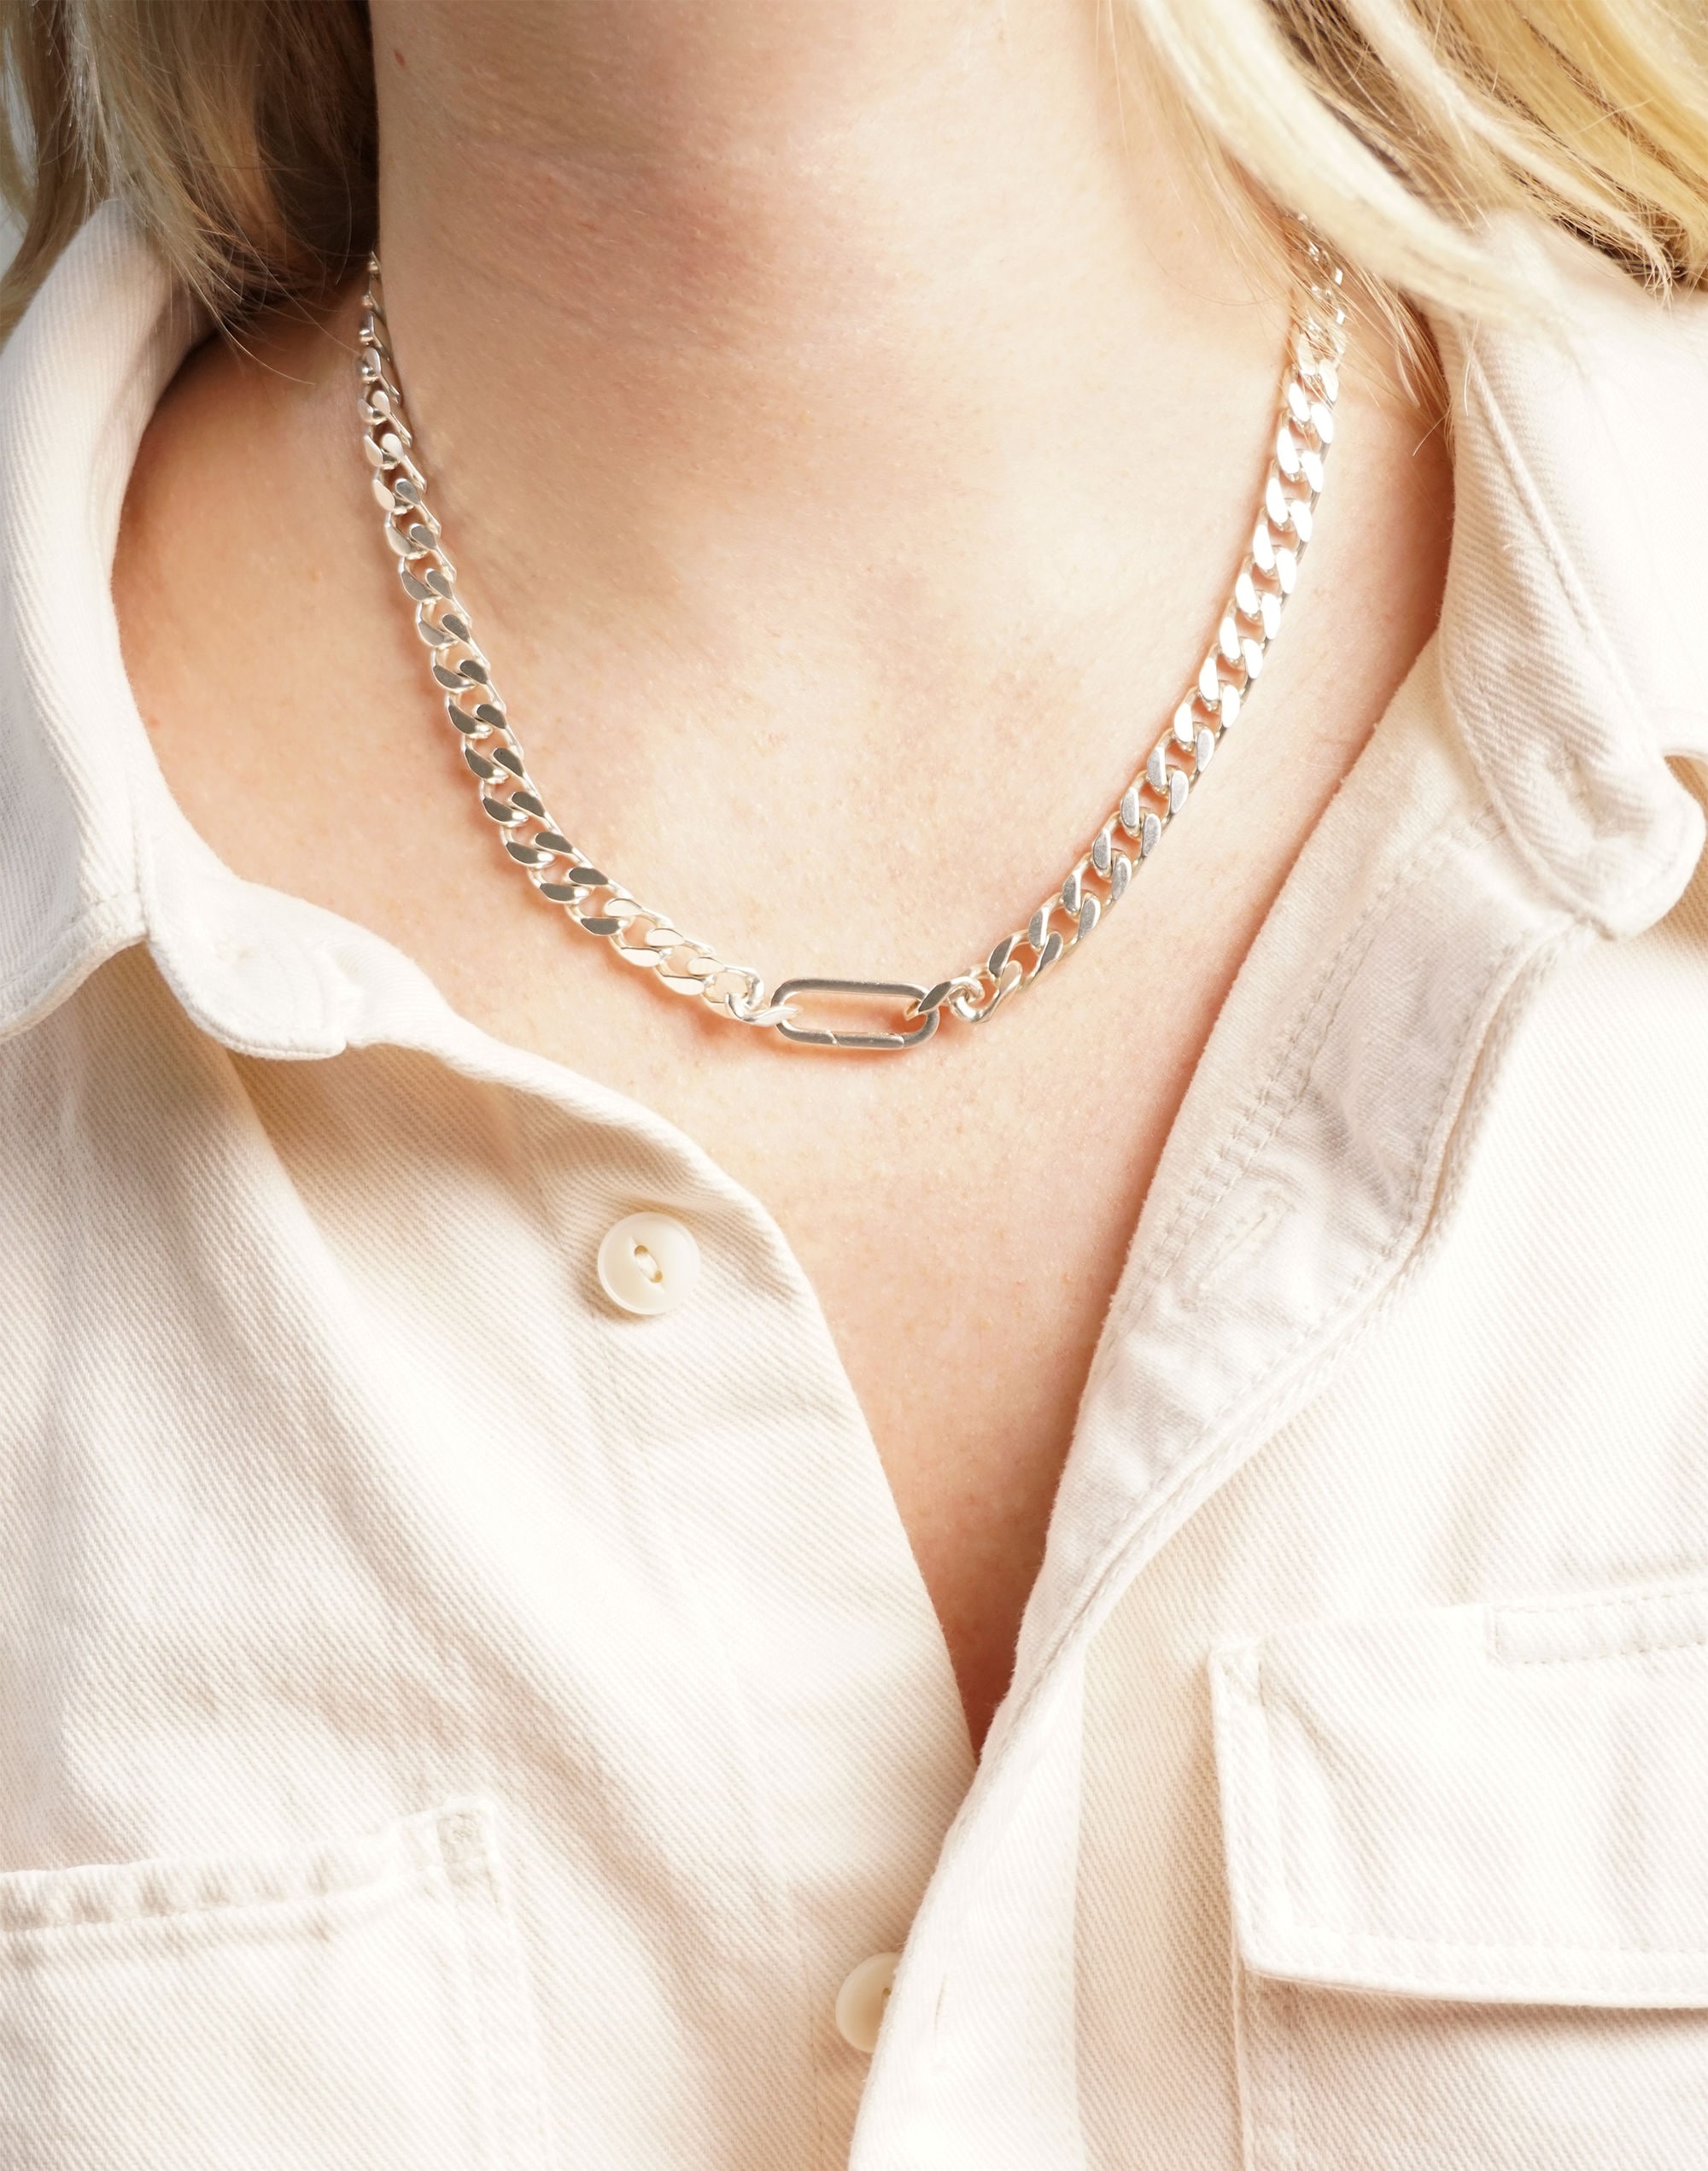 CHARLOTTE CAUWE STUDIO Curb Chain Necklace in Sterling Silver